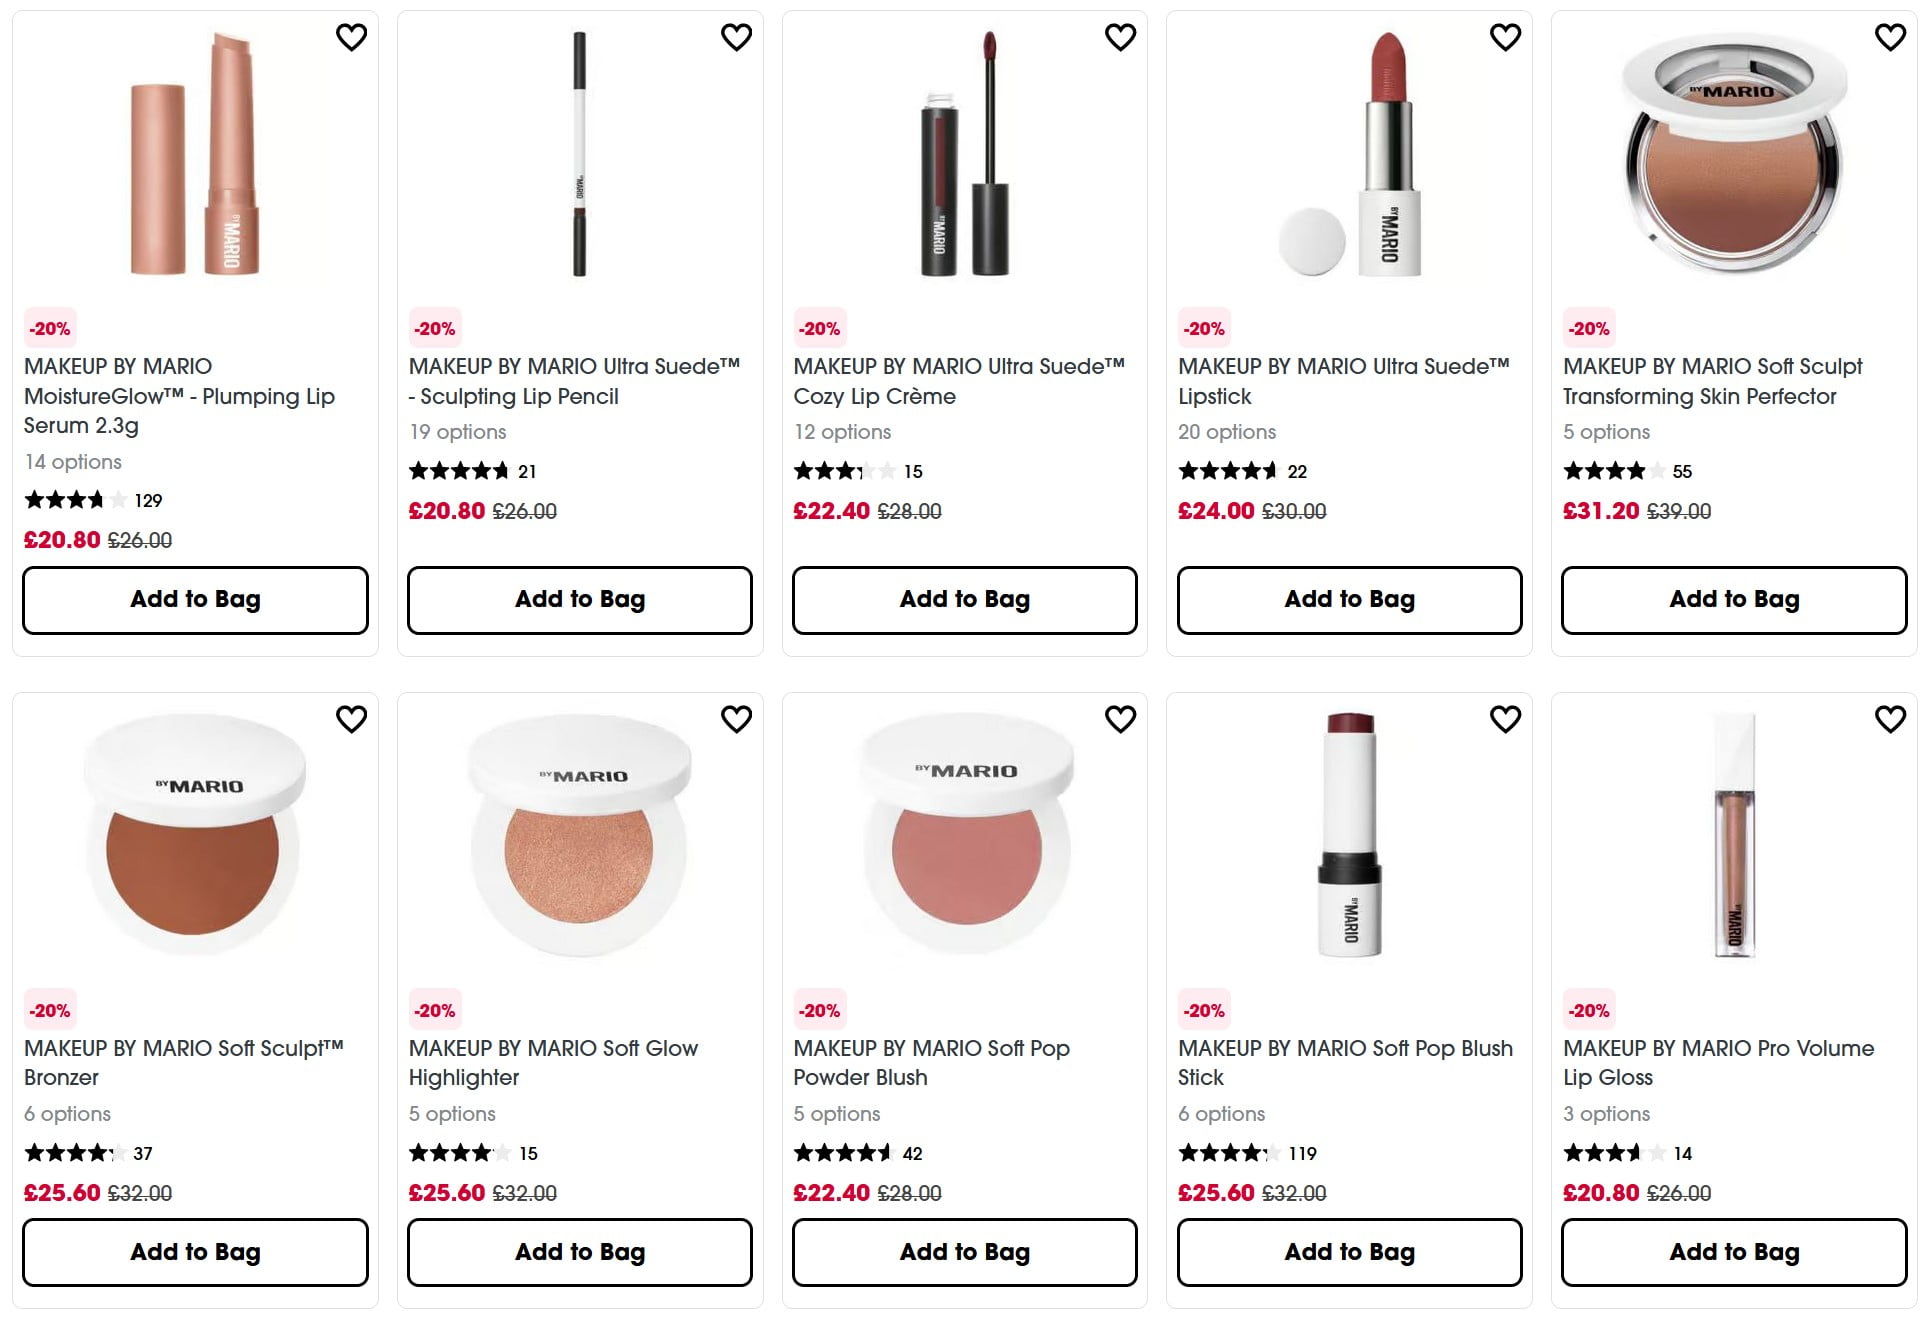 Up to 20% off Makeup by Mario at Sephora UK.